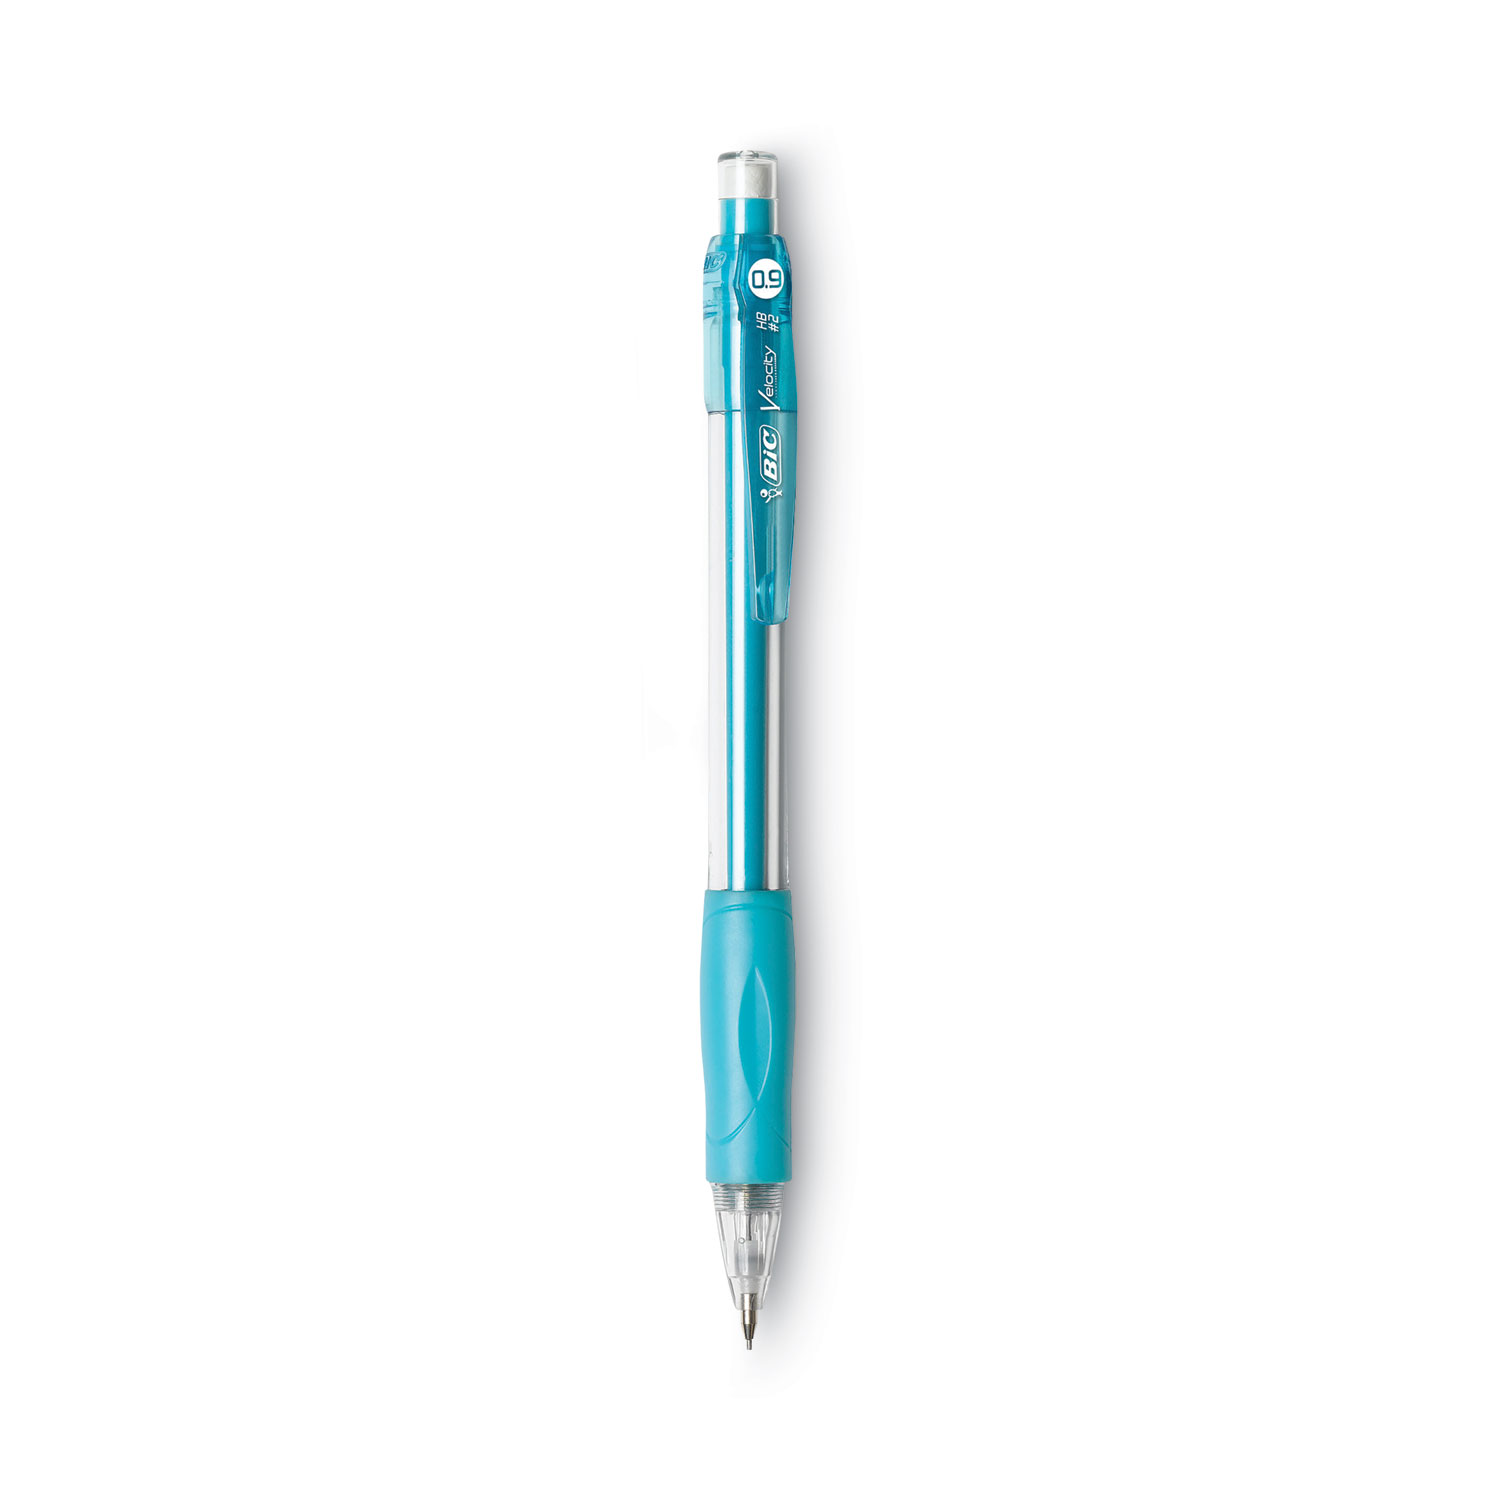 Liqui-Mark  Mechanical Pencils - White Barrel with Rubber Grip & # 2 HB  Leads - Refillable